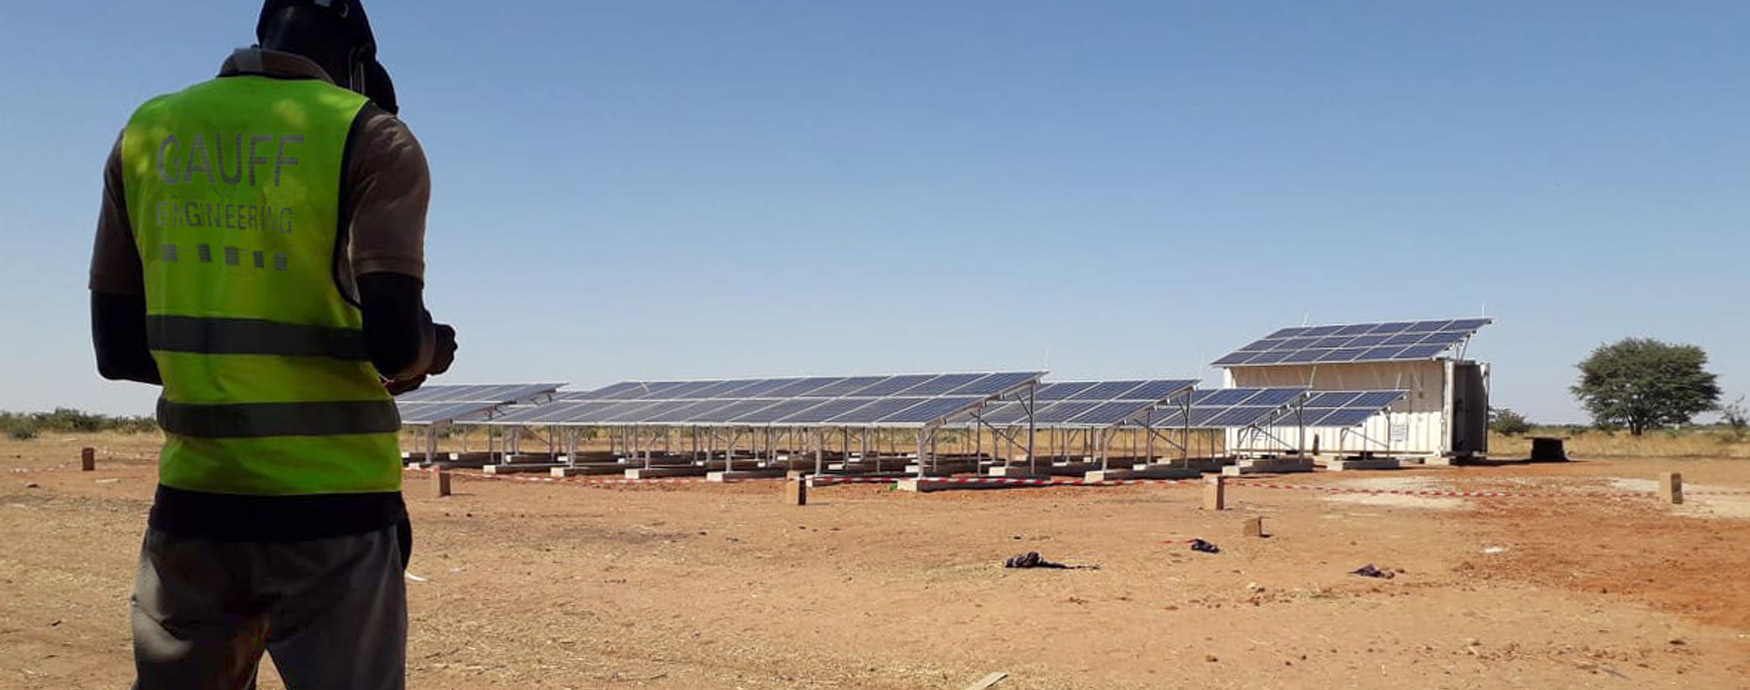 Employees in front of the solar energy system in Senegal